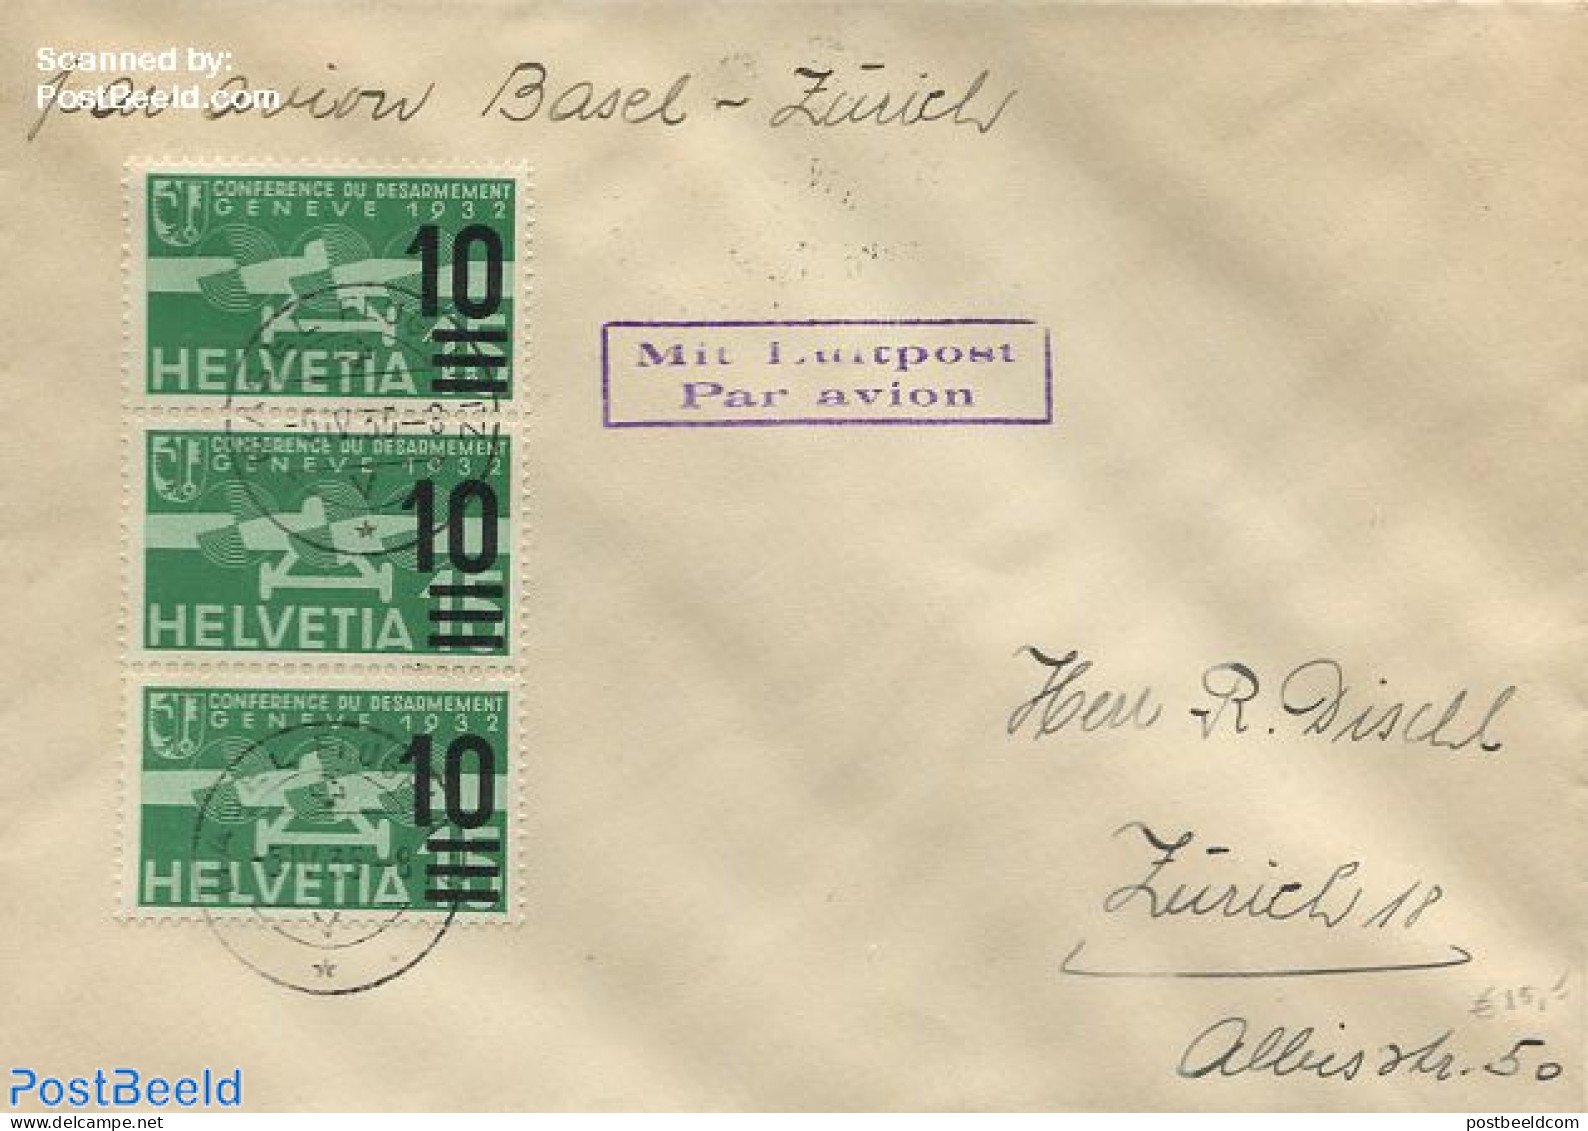 Switzerland 1935 Airmail From Basel To Zurich, Postal History - Storia Postale